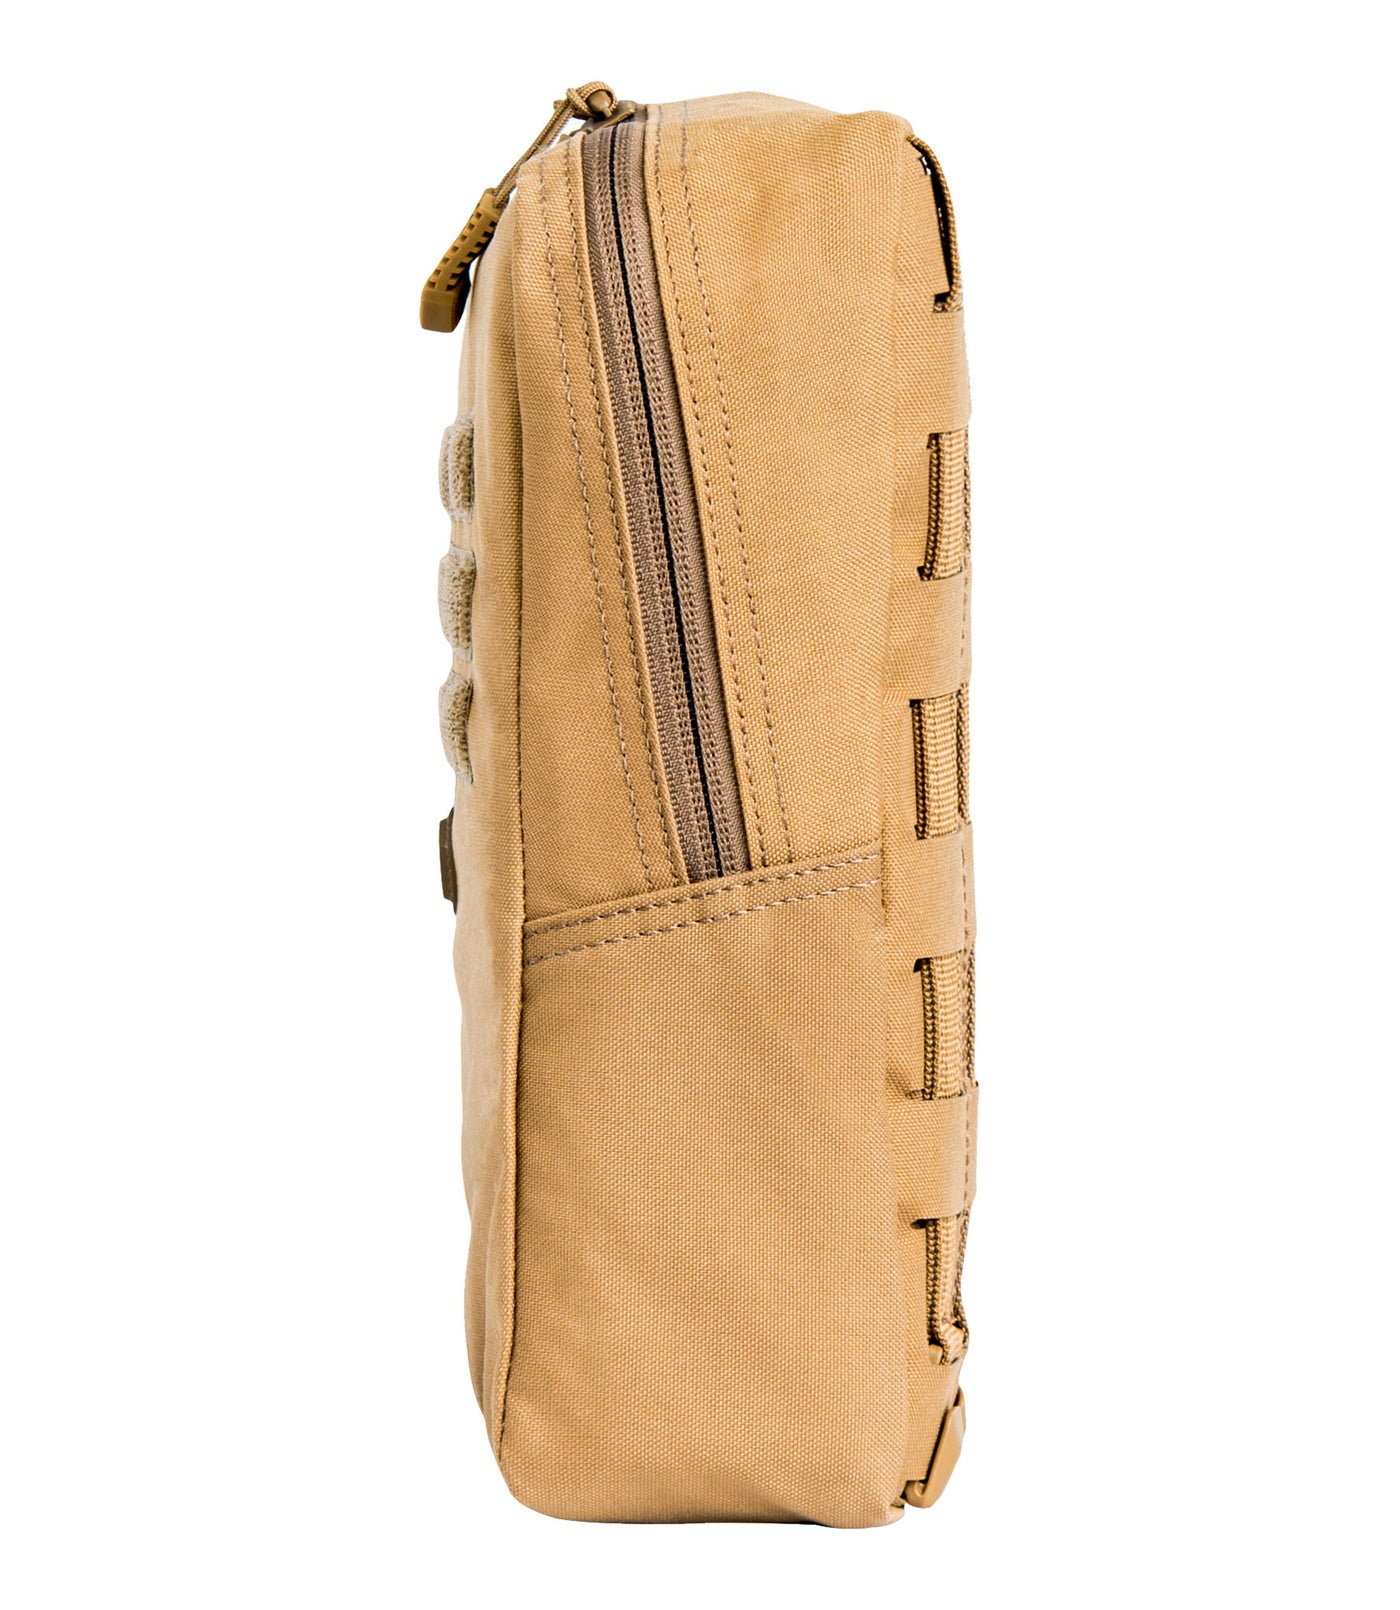 Side of Tactix Series 6x10 Utility Pouch in Coyote